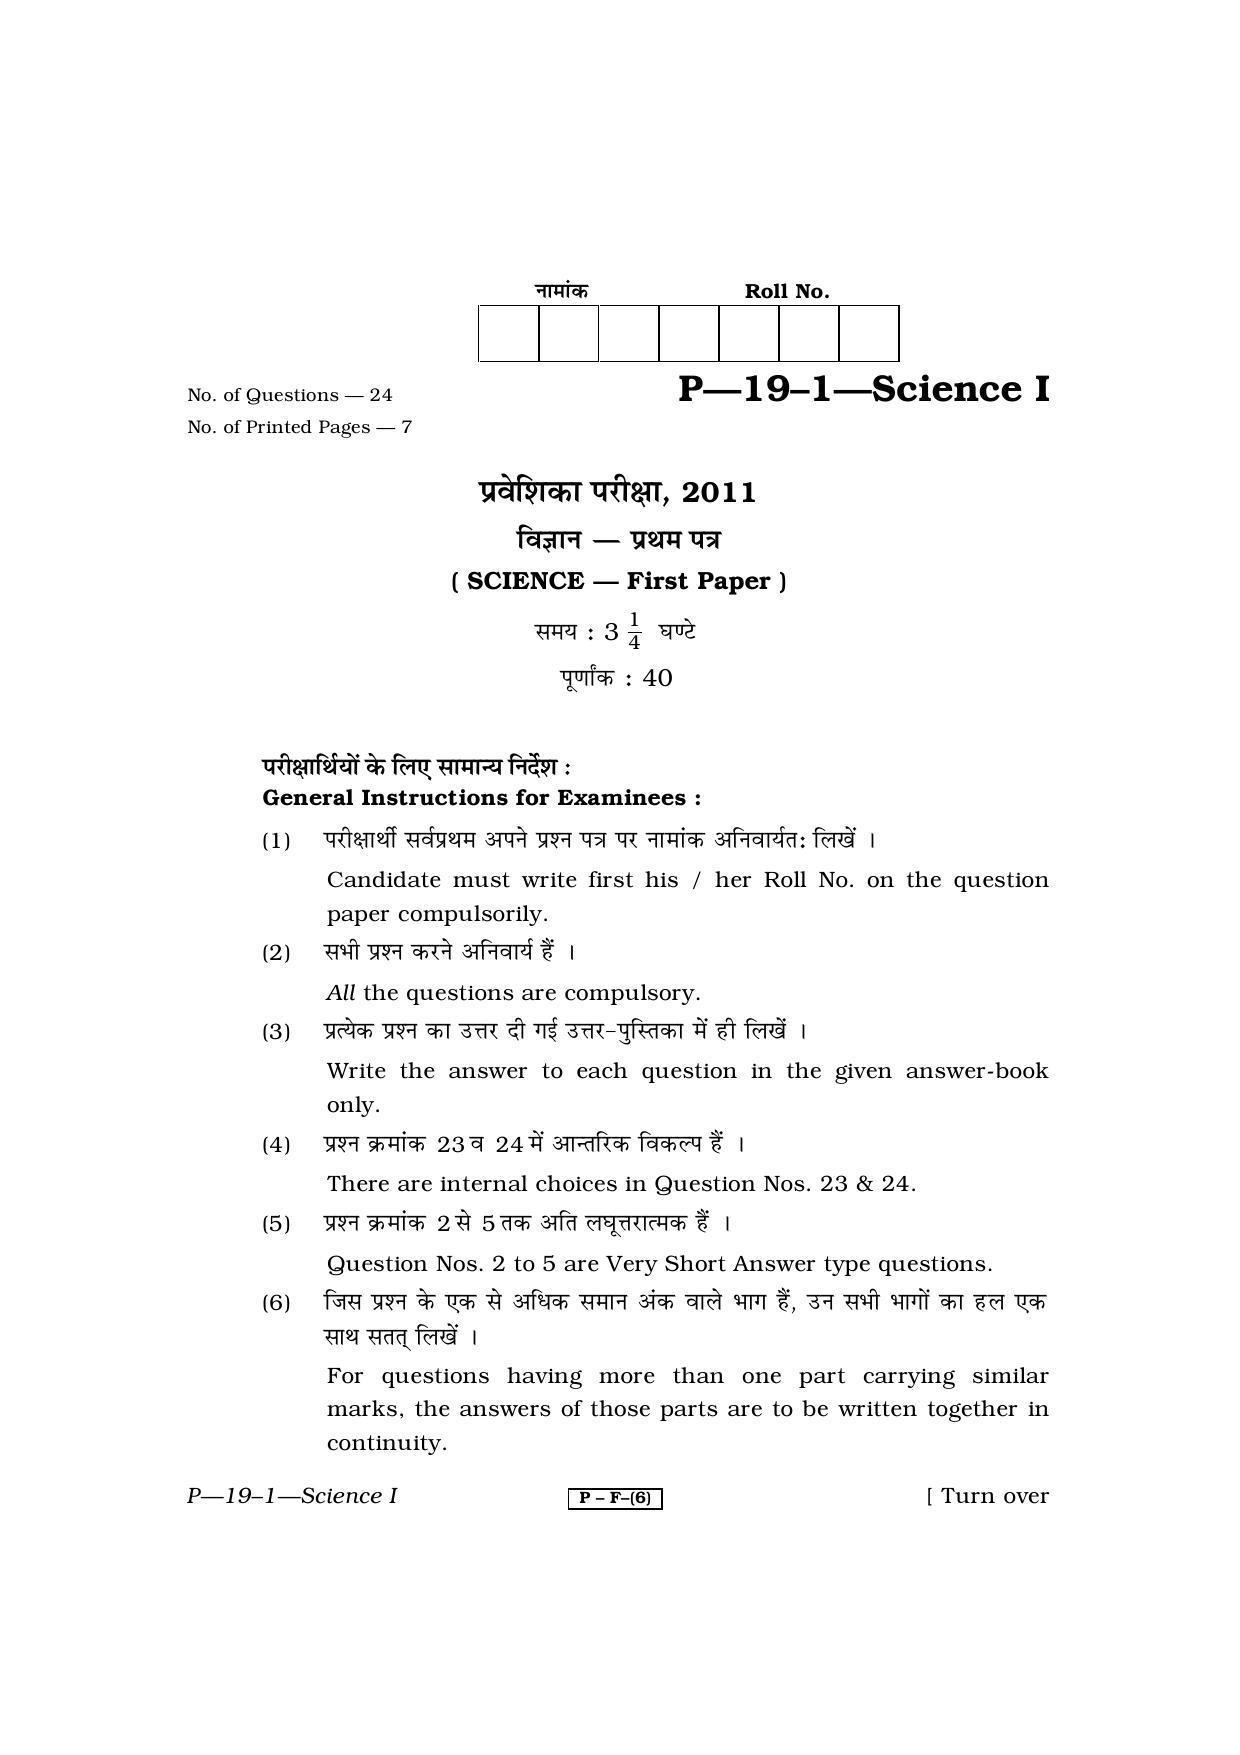 RBSE 2011 Science Praveshika Question Paper - Page 1